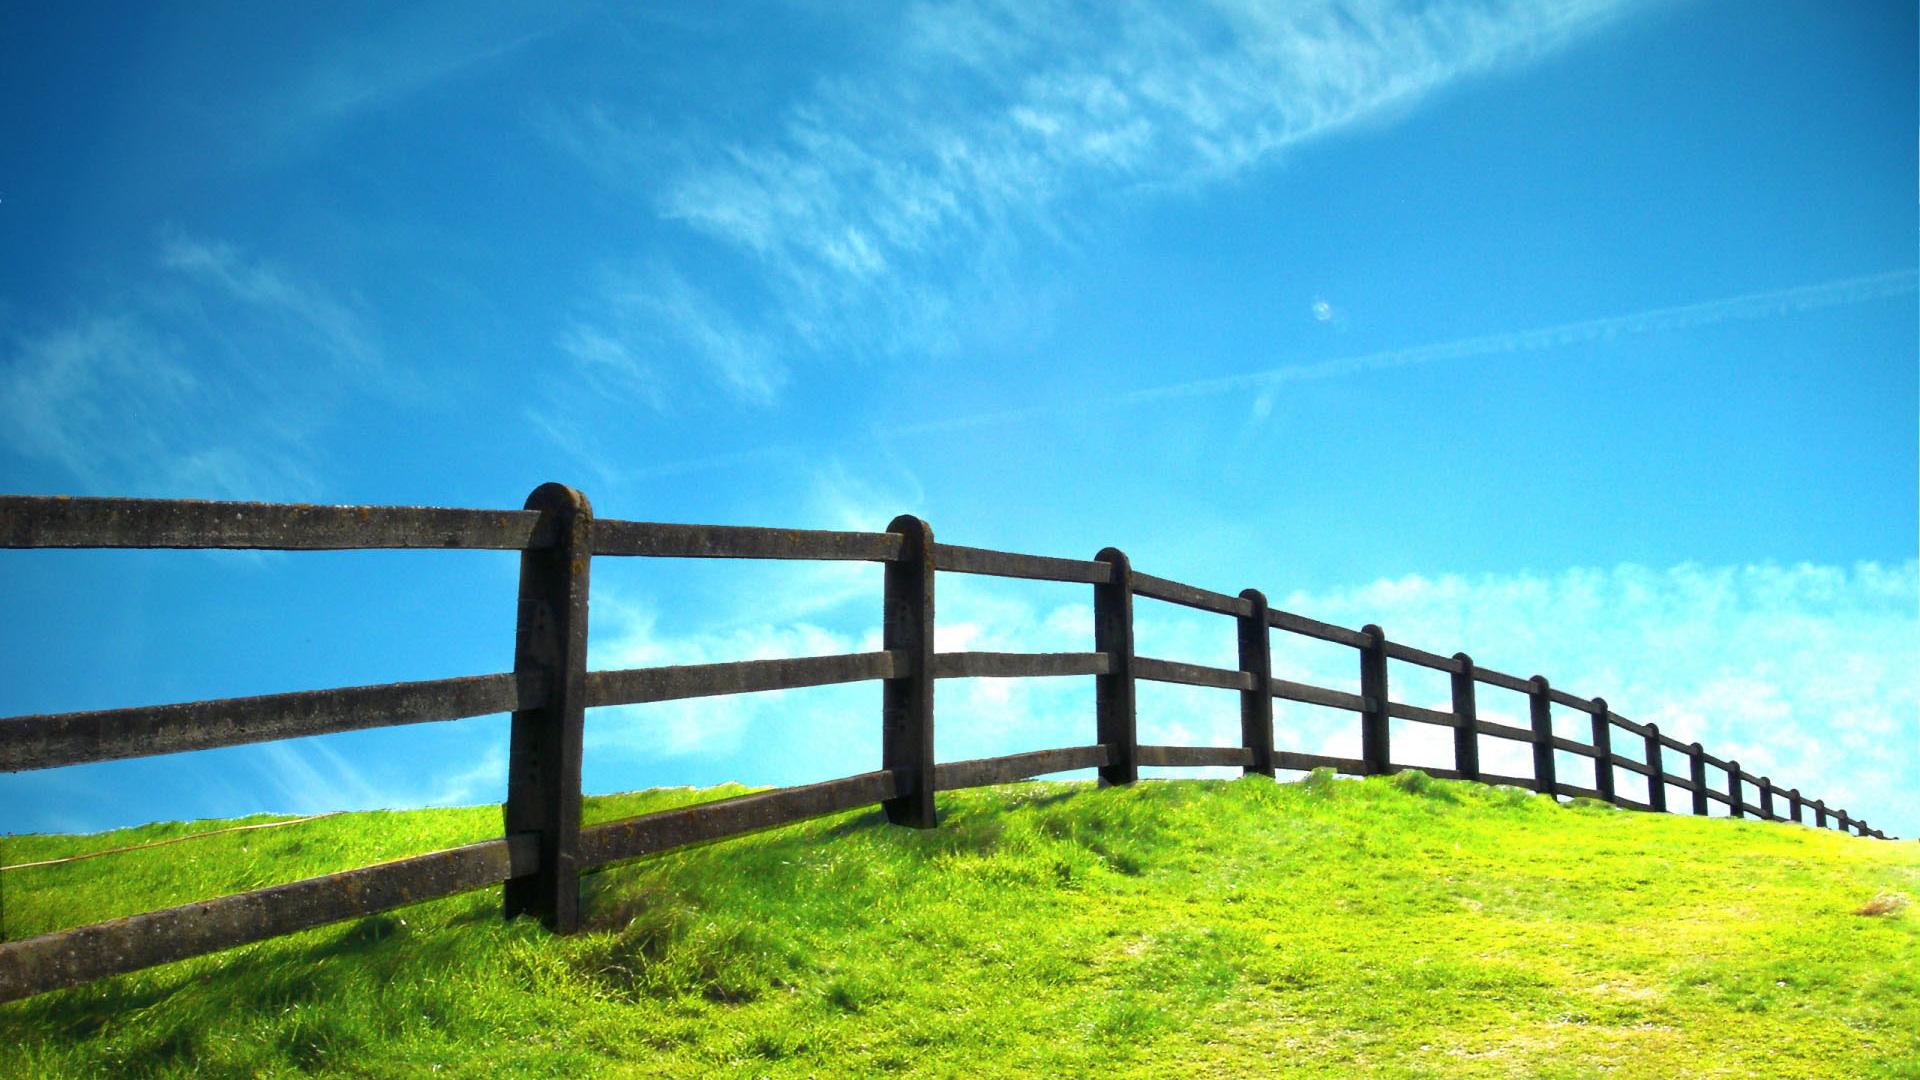 Hd Grassland And Fence Nature Scenery Background Widescreen and HD